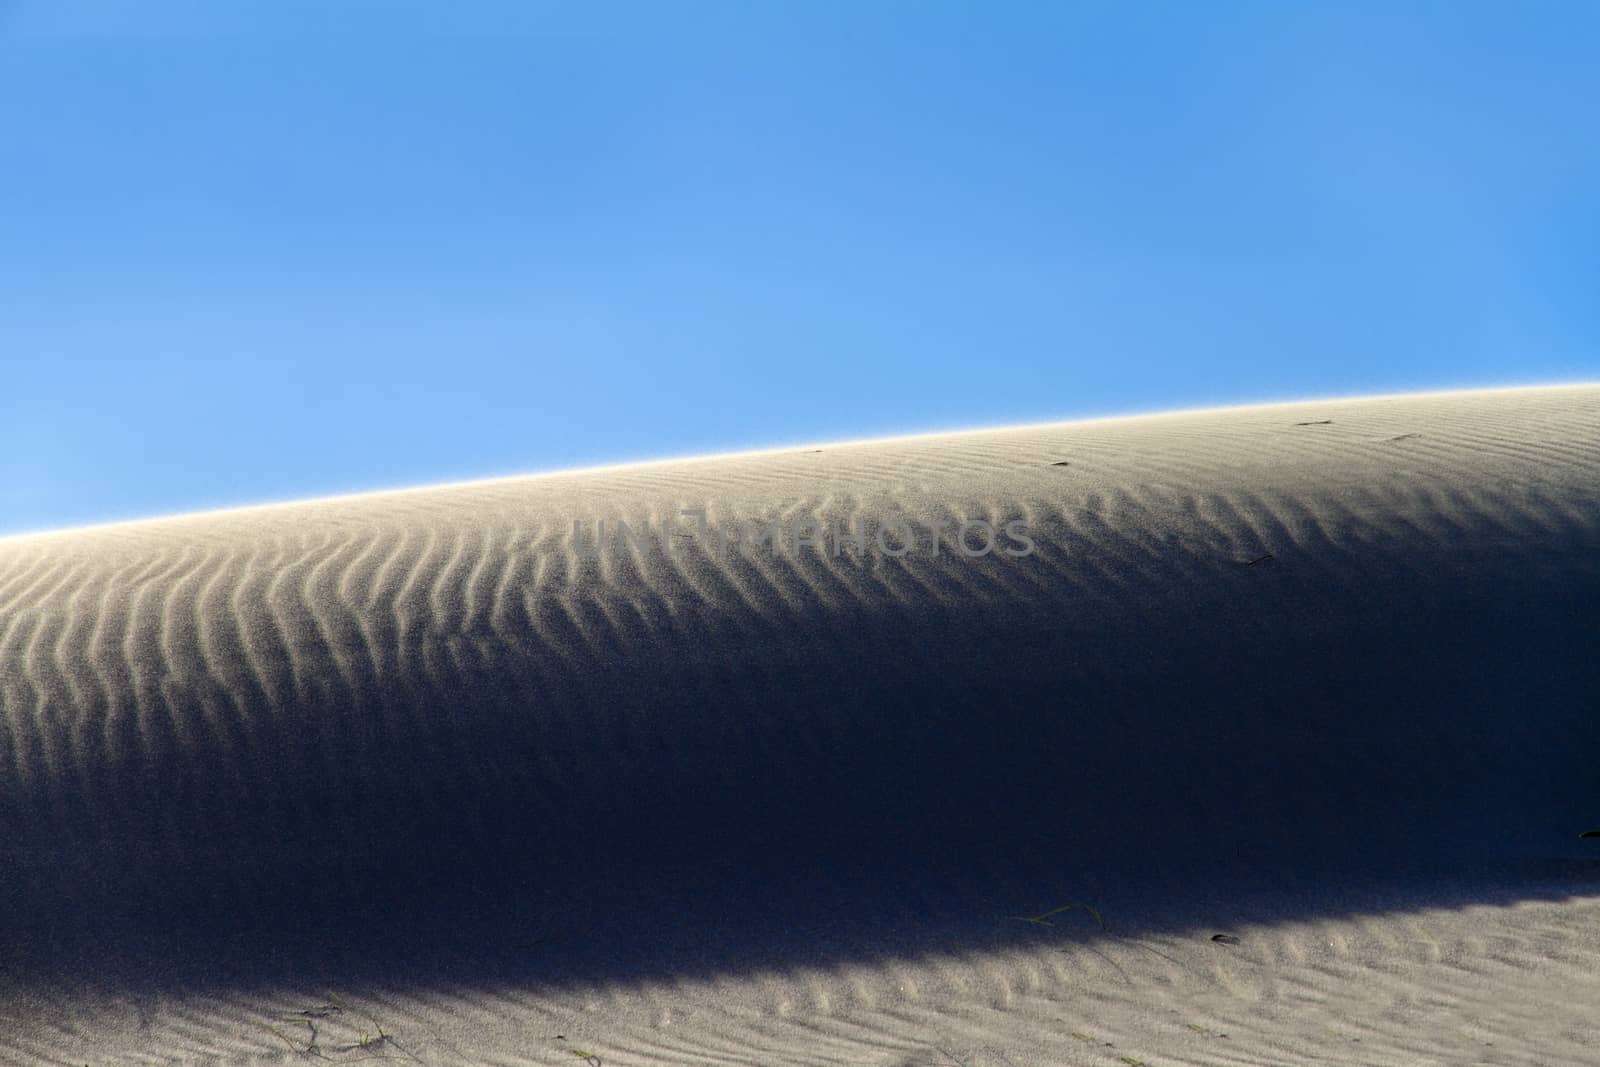 Shadow play on a sand dune with backlight effect and the sun shining in the blue sky 